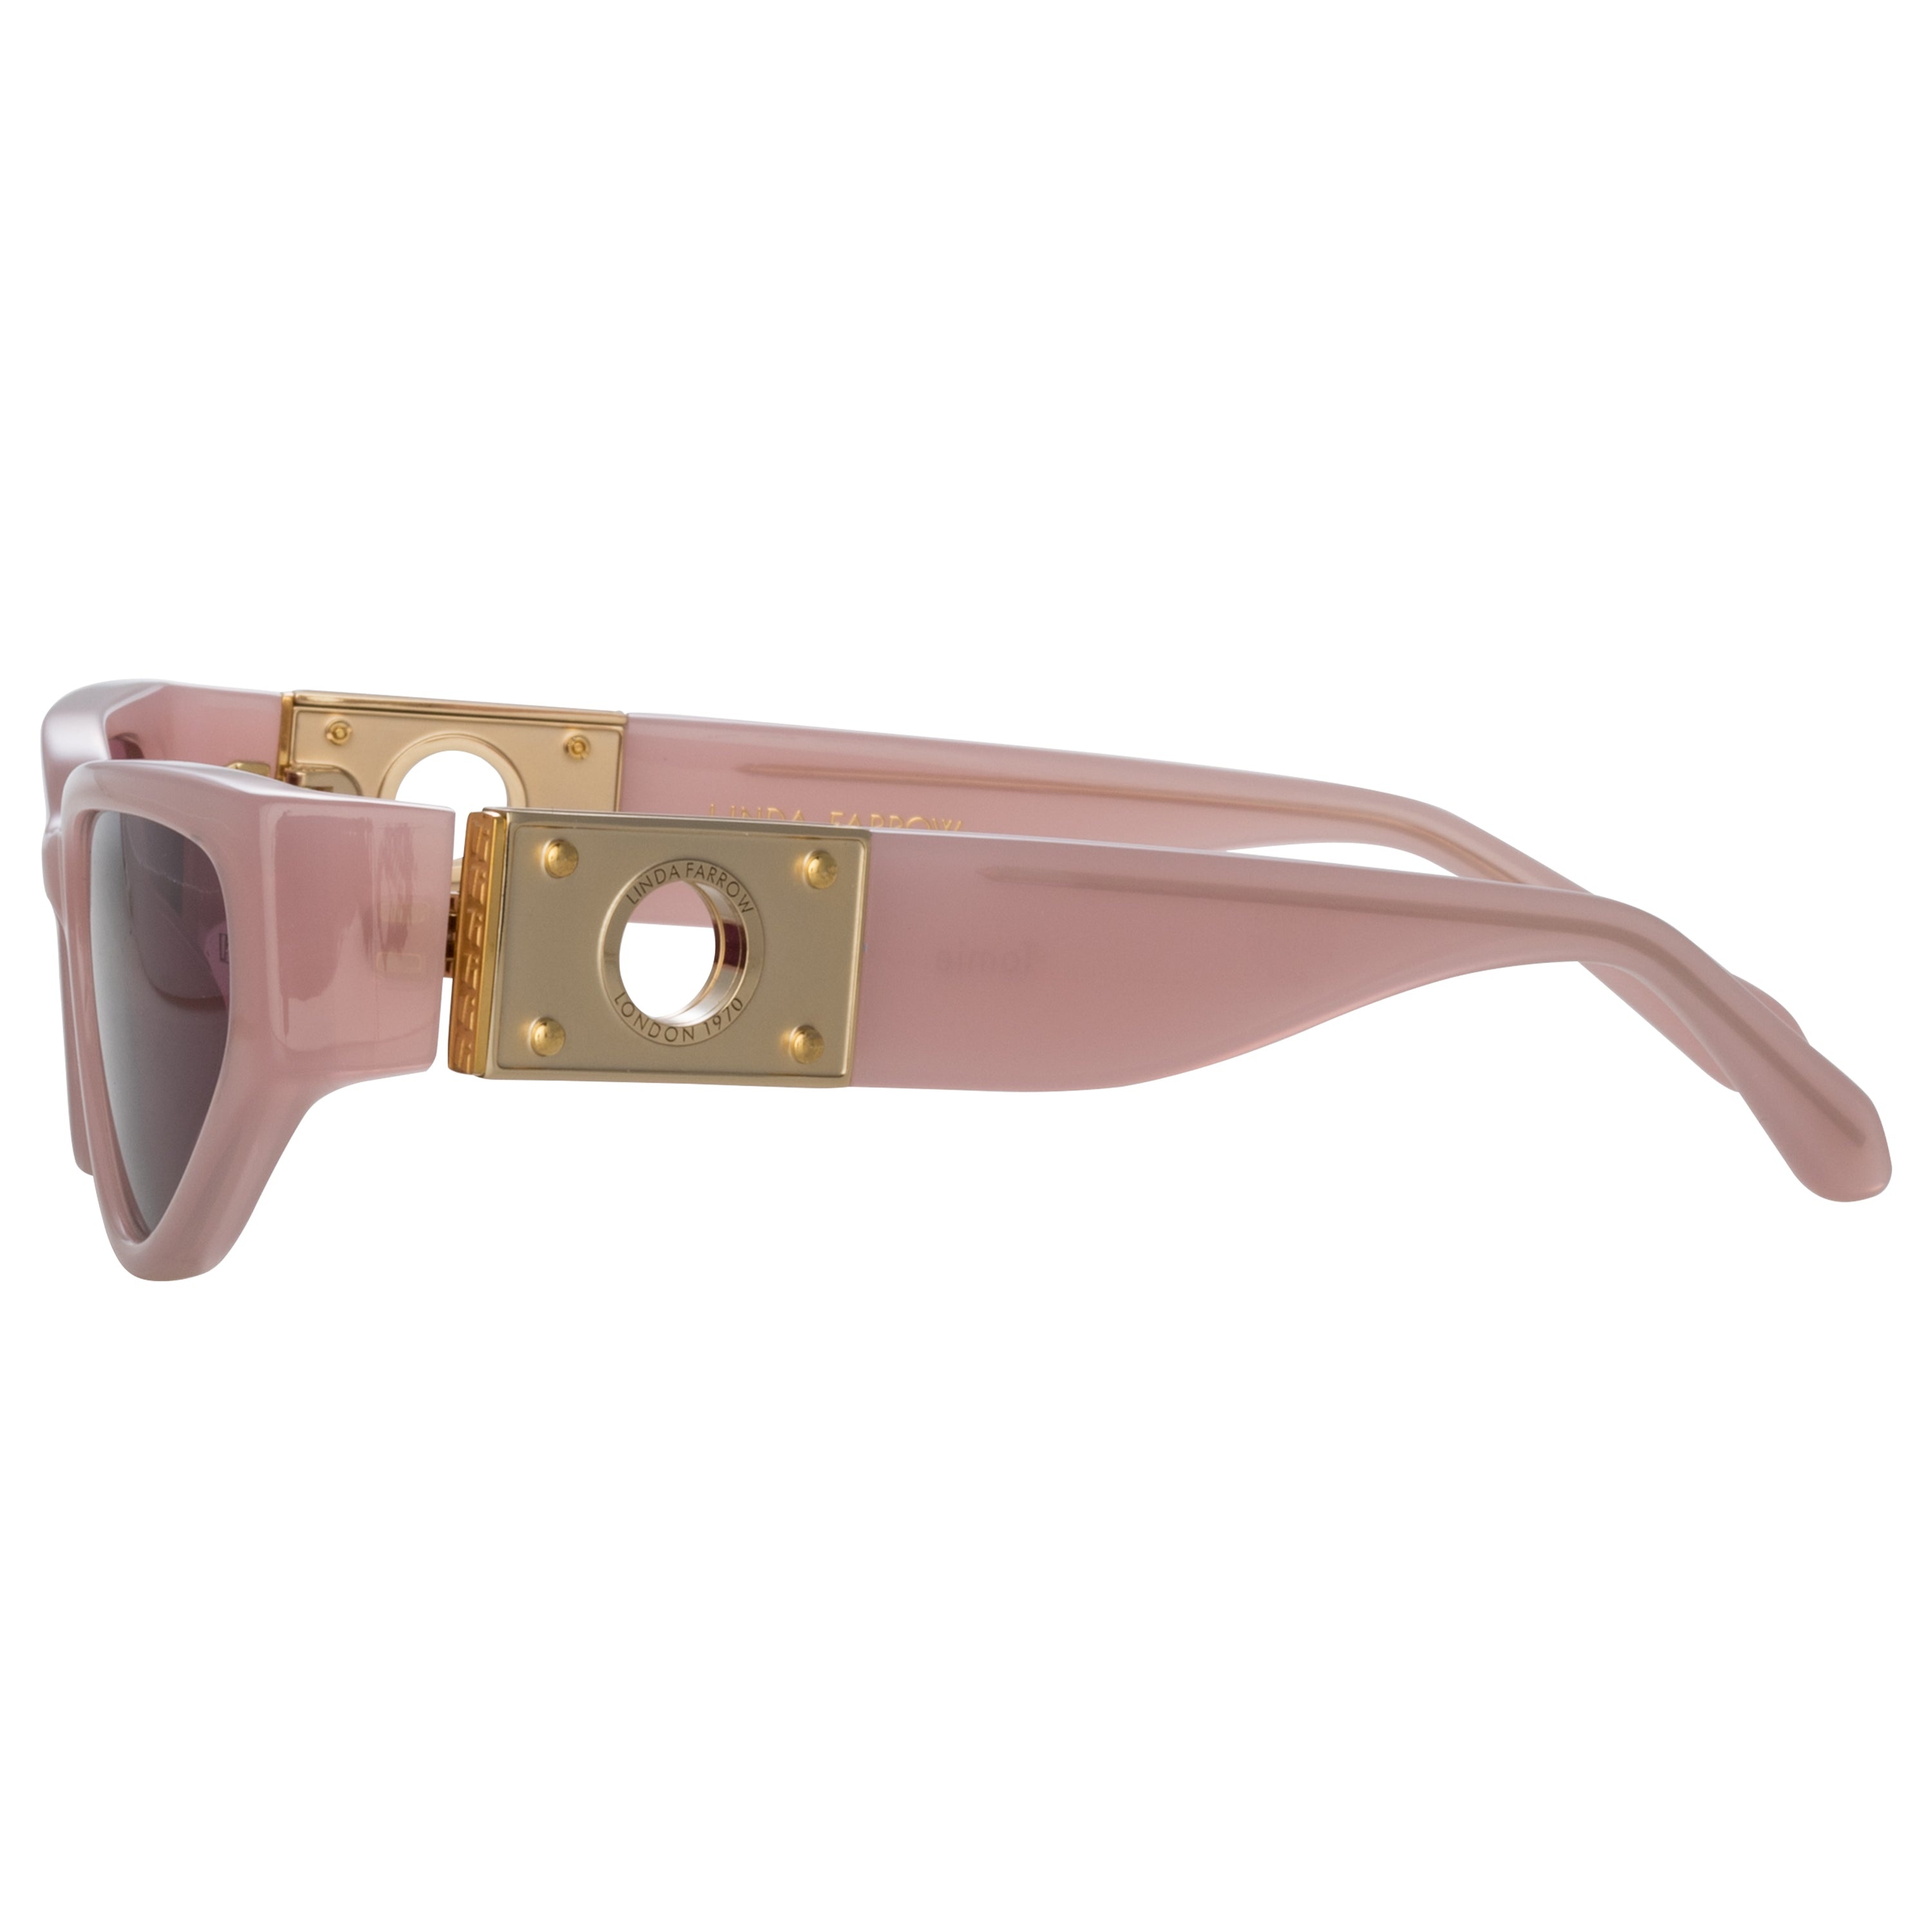 TOMIE CAT EYE SUNGLASSES IN LILAC - 5